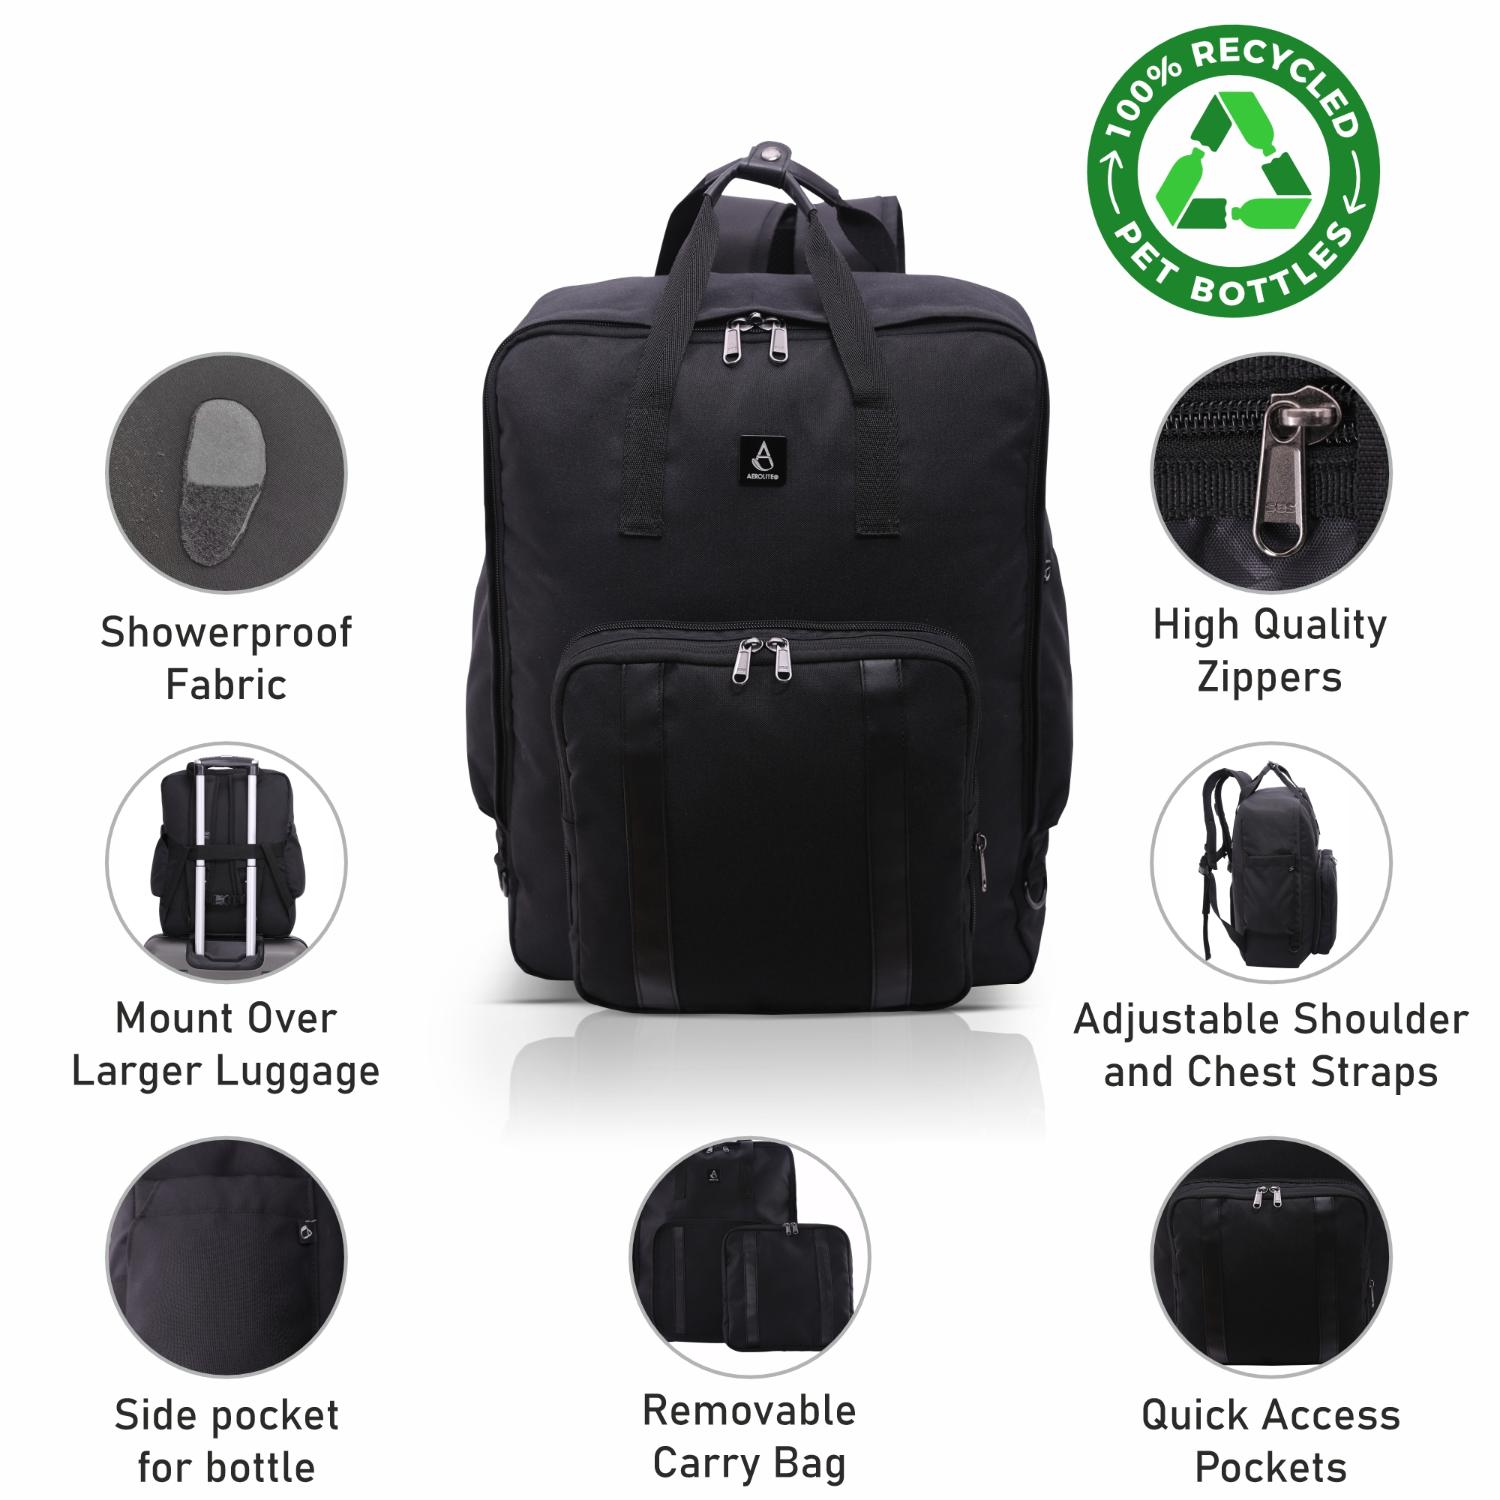 Aerolite 45x36x20cm easyJet Maximum Eco-Friendly Super Premium Quality Backpack With Removable Small Carry Pouch Recycled Eco-Friendly, Shower-Resistant Cabin Luggage Approved Travel Carry On Flight Rucksack with 10 Year Warranty - Aerolite UK